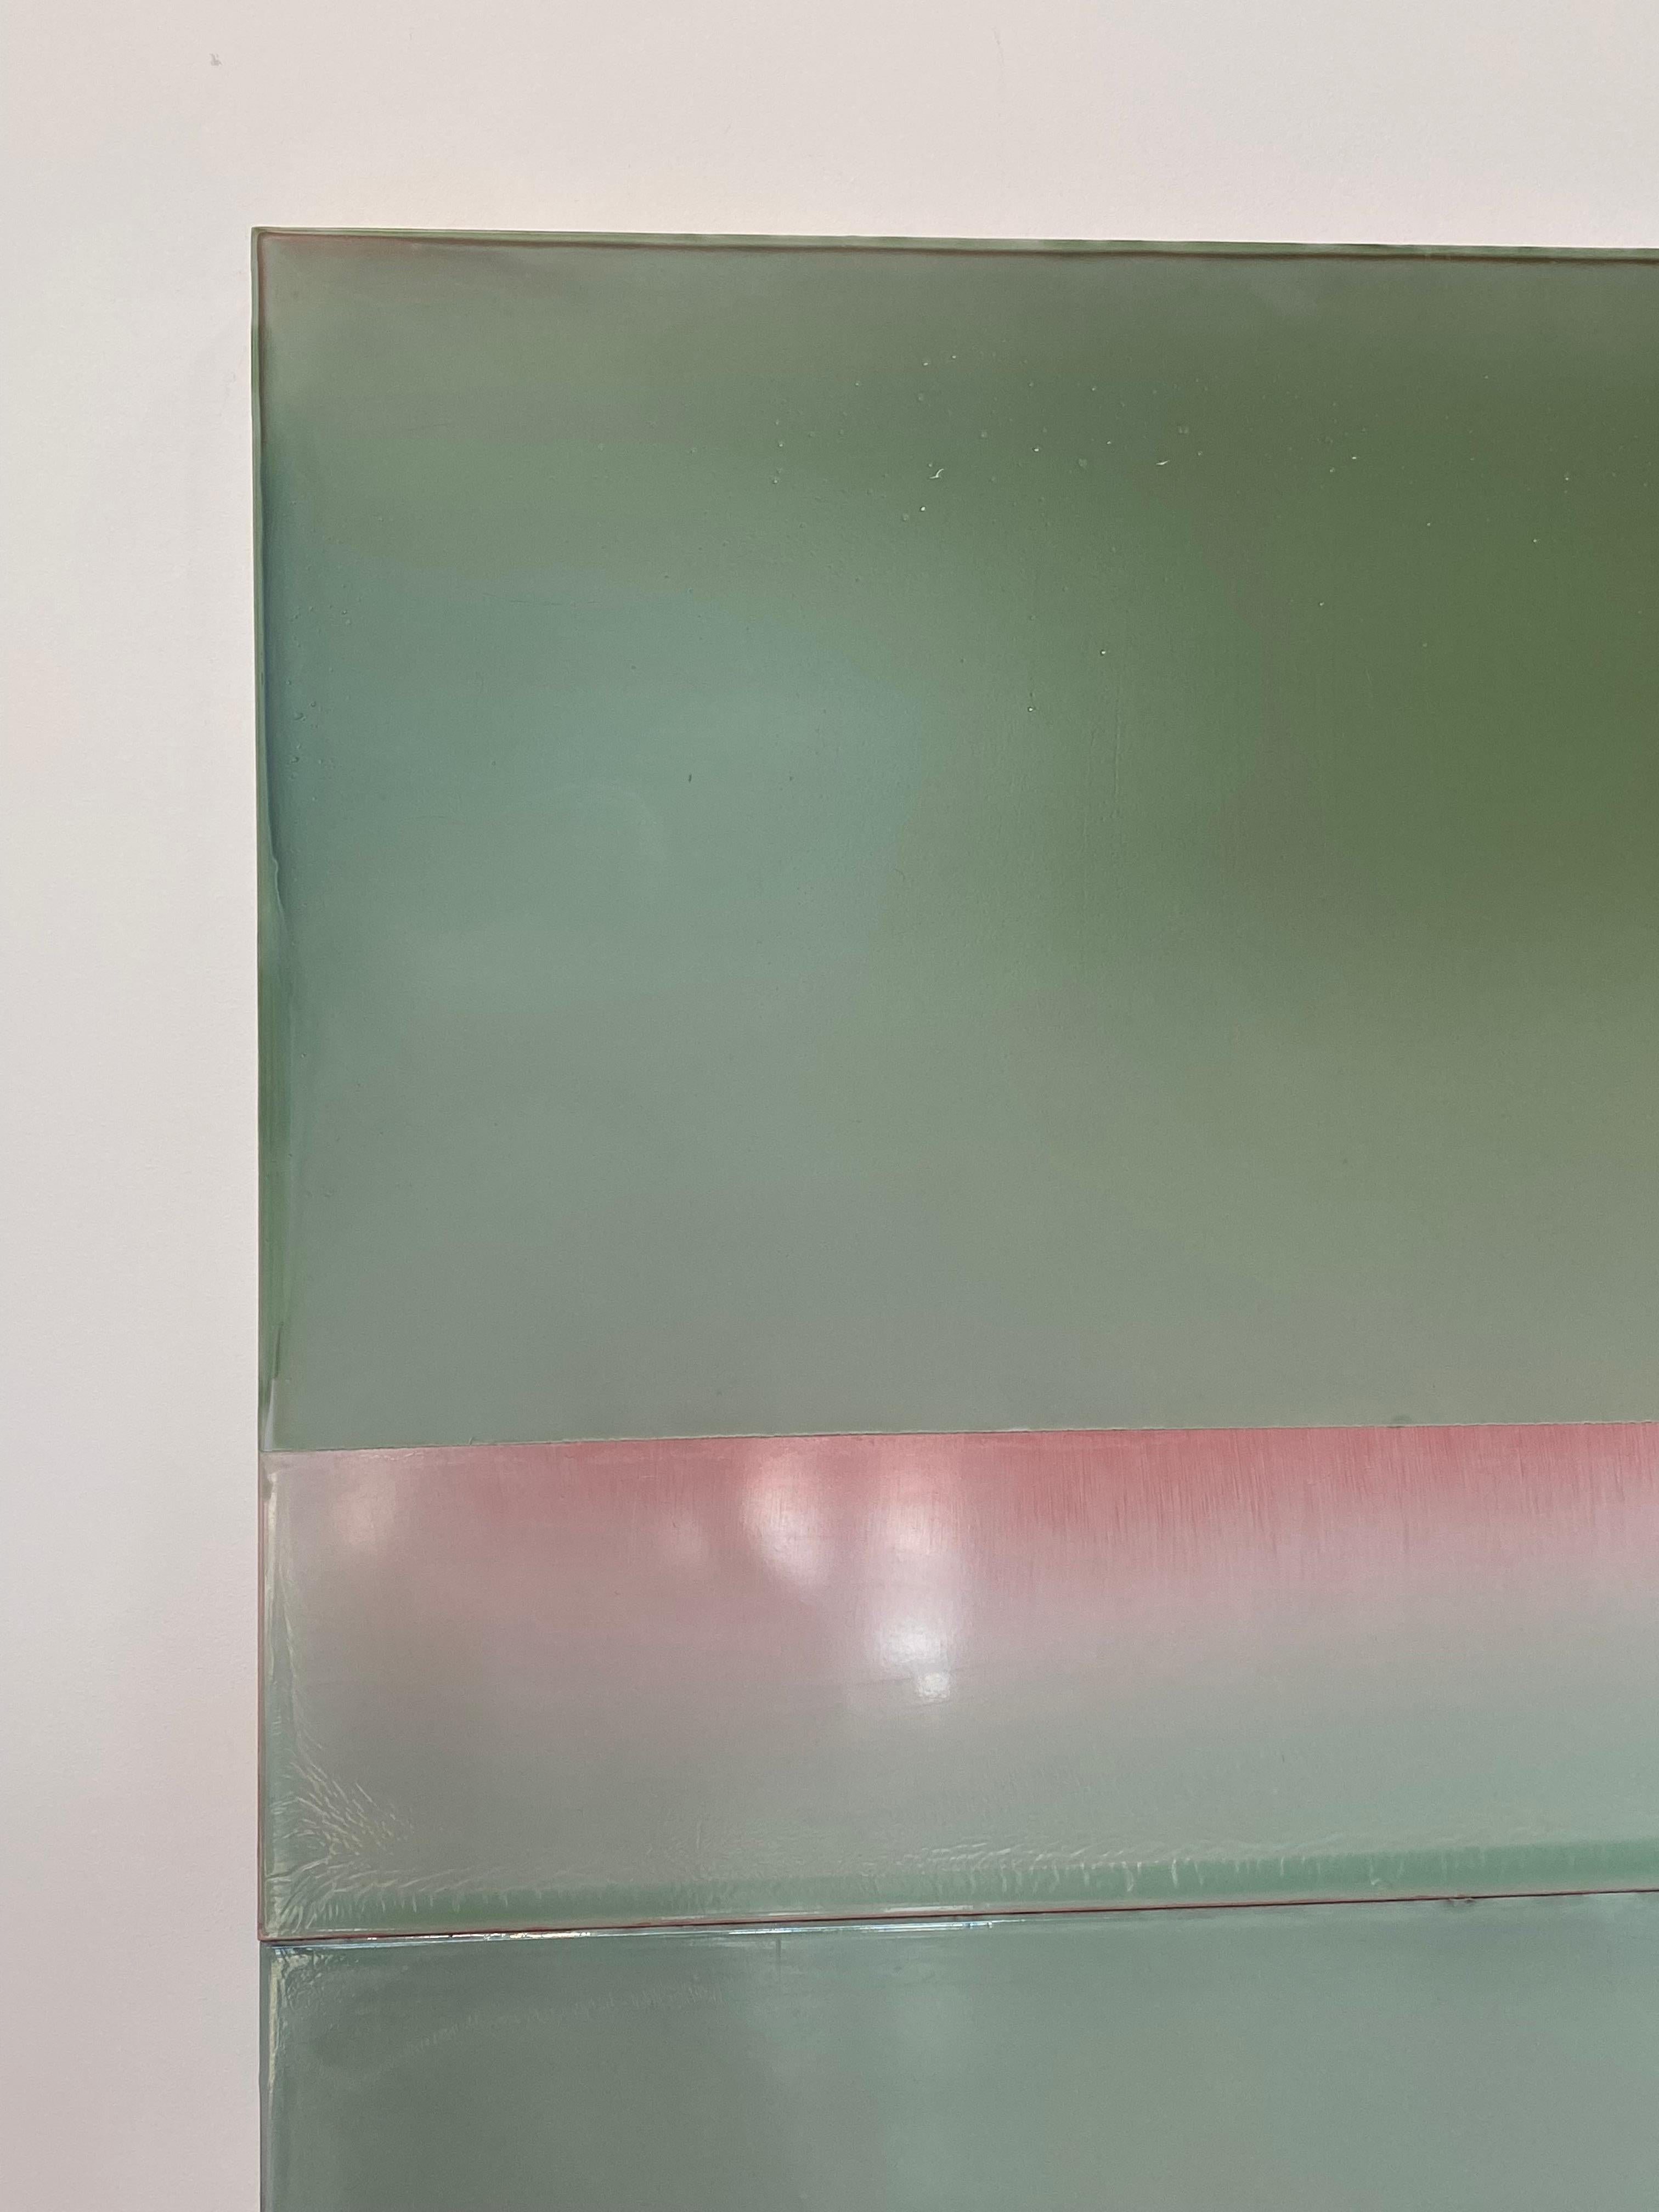 Traces, Sage, Olive Green, Salmon Coral Pink Abstract Horizons, Tinted Polymer - Contemporary Painting by Susan English